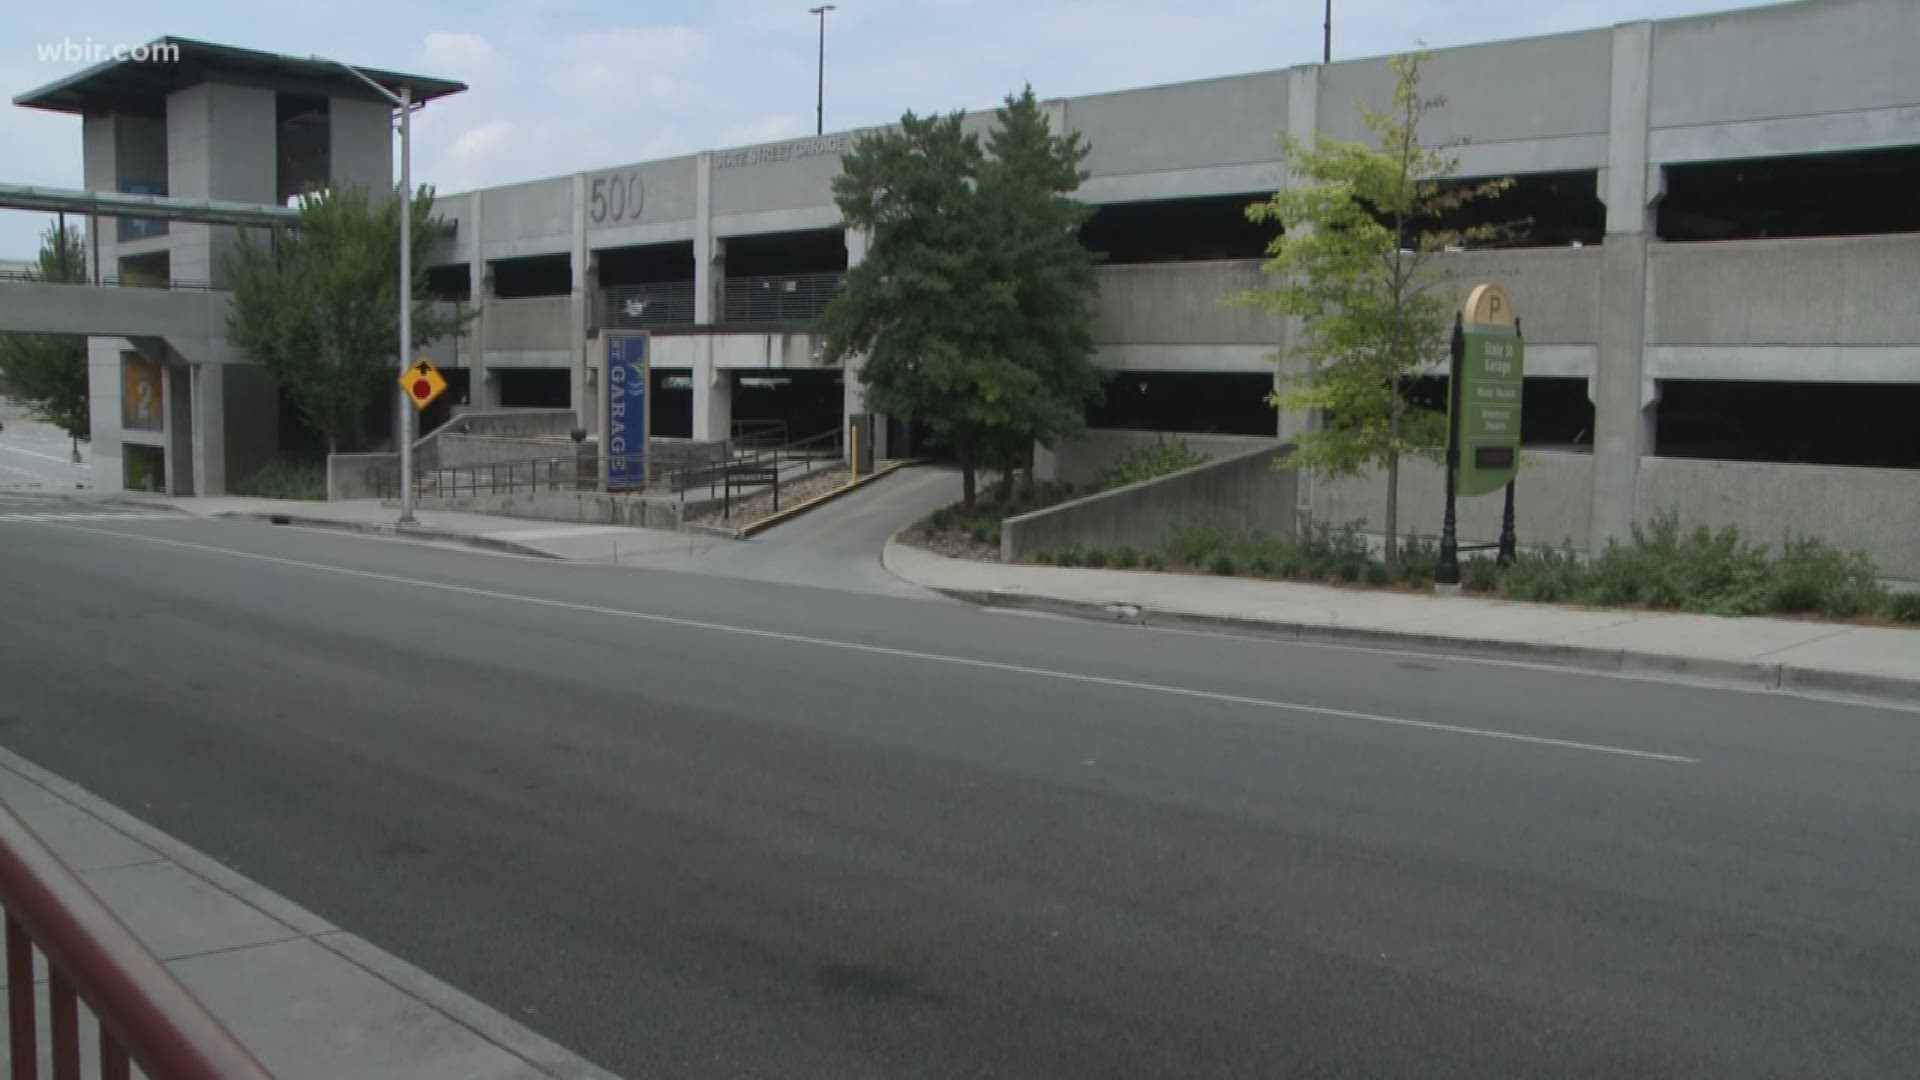 As work continues, the State Street Garage will also lose 554 spots.